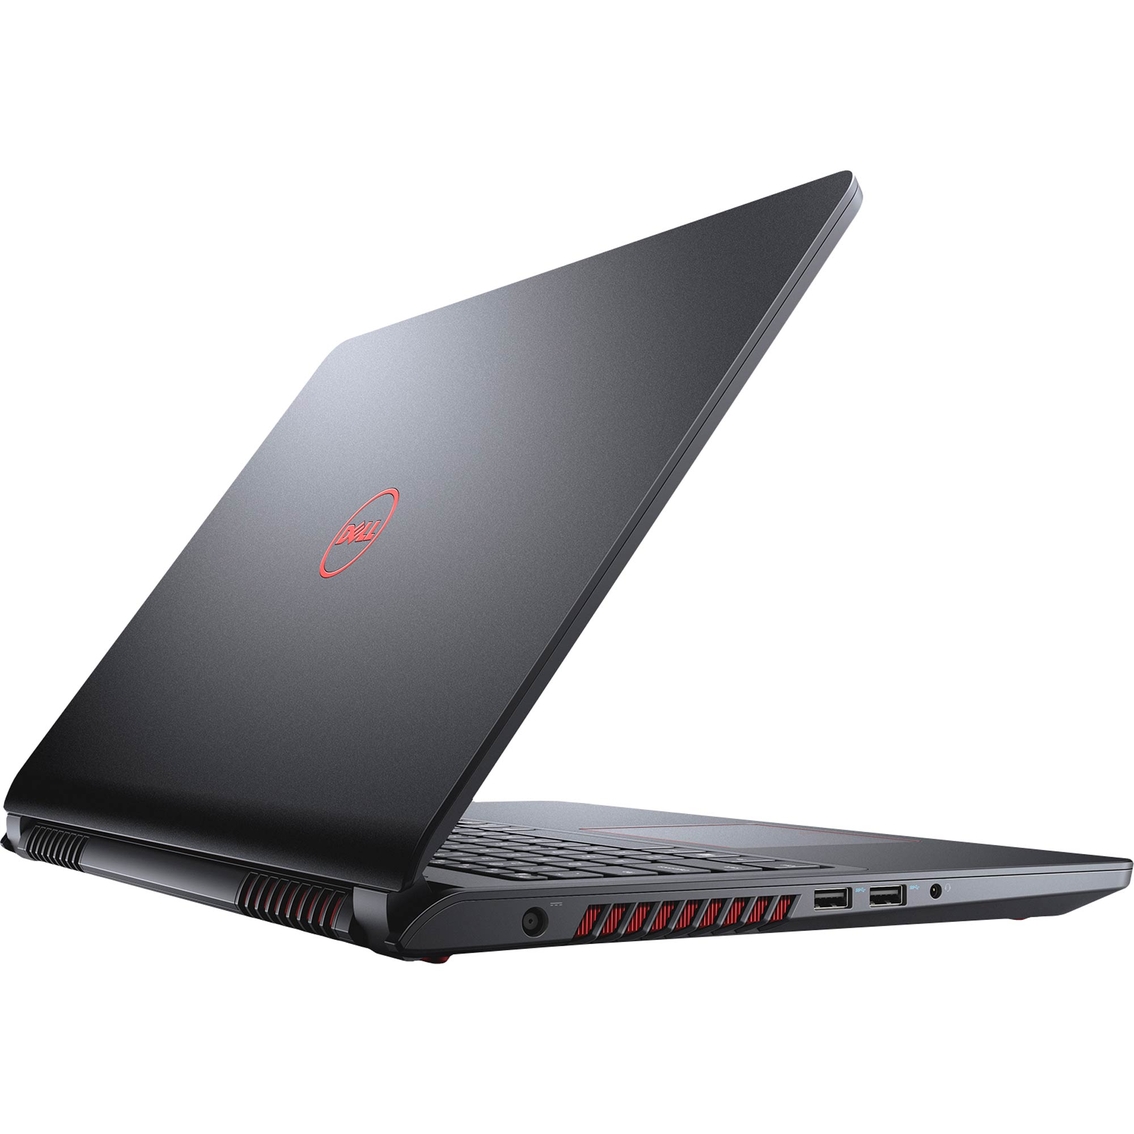 Dell Inspiron 15 5000 Gaming 15.6 In. FHD 7th Gen Intel Core i7-7700HQ Notebook - Image 4 of 4